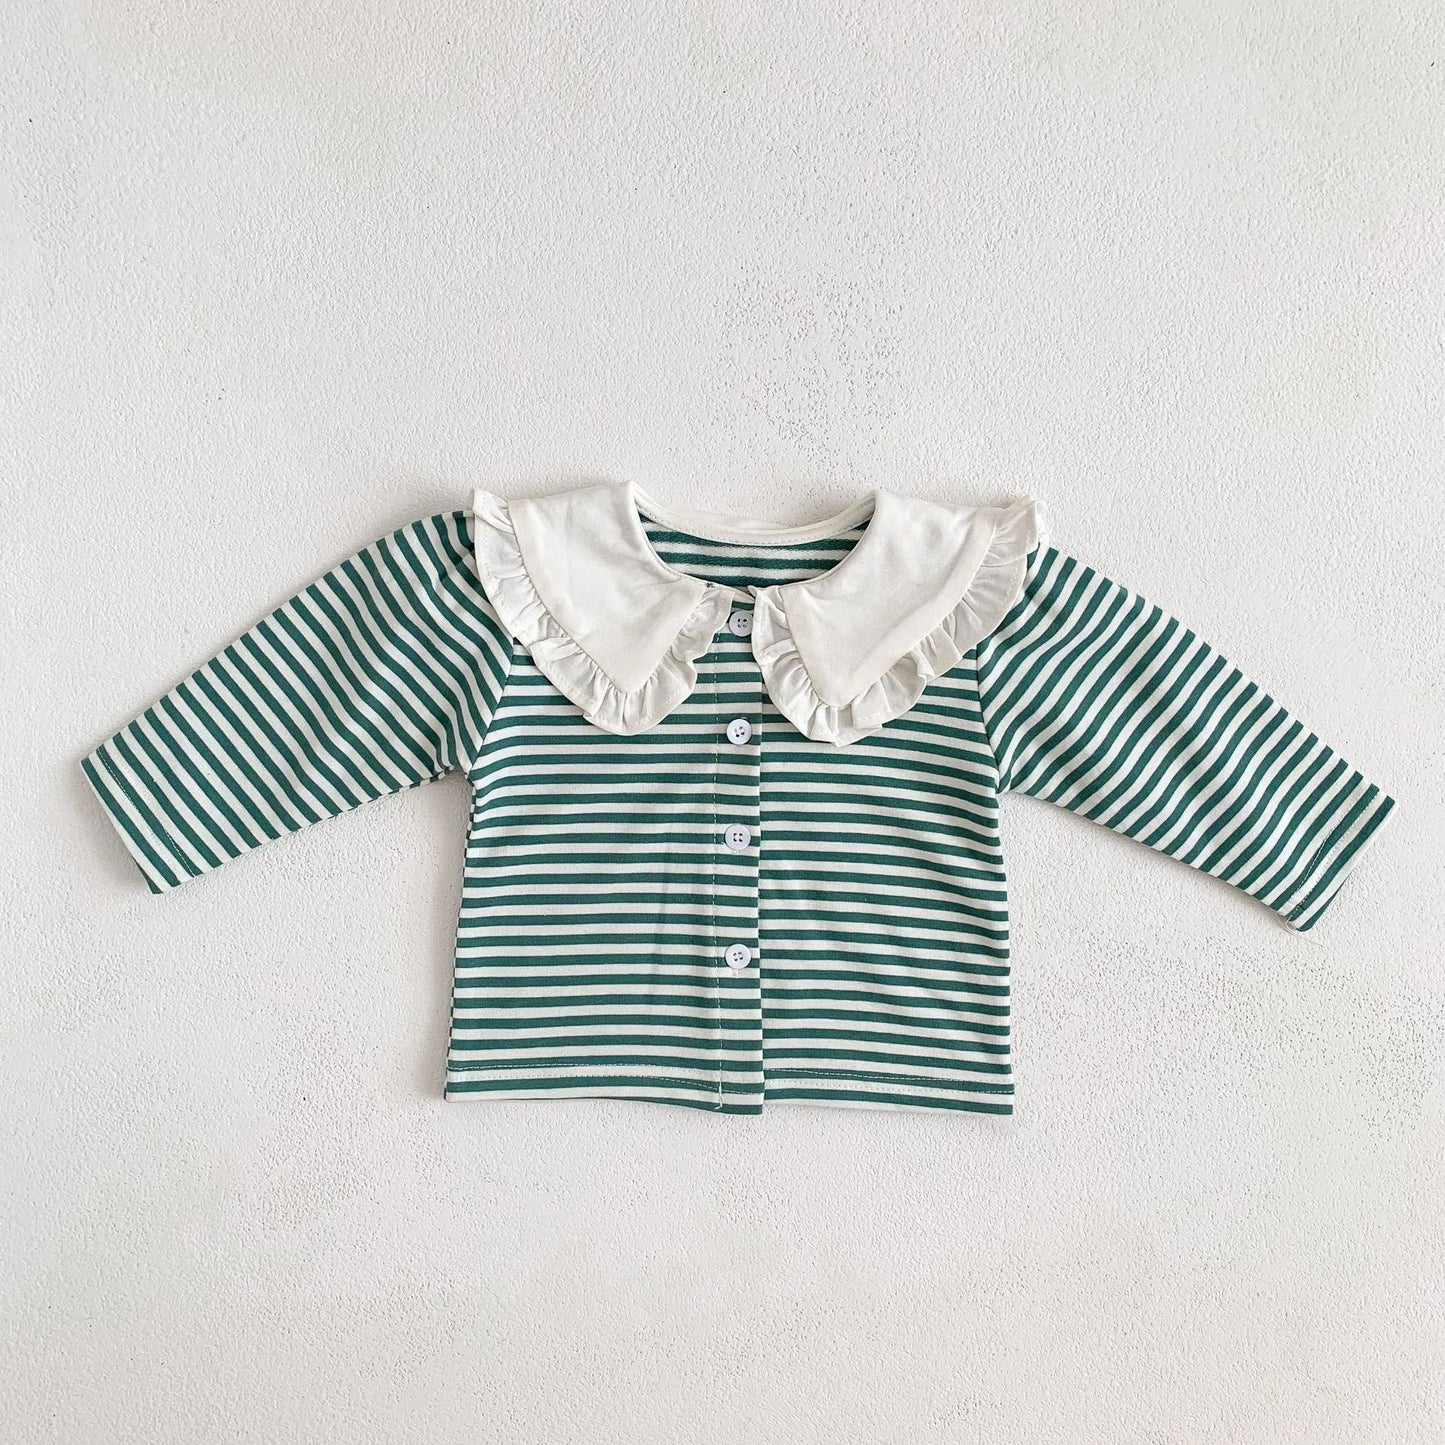 Baby Ruffled Striped Cardigan Top Baby Girl All-Match Bottoming Top